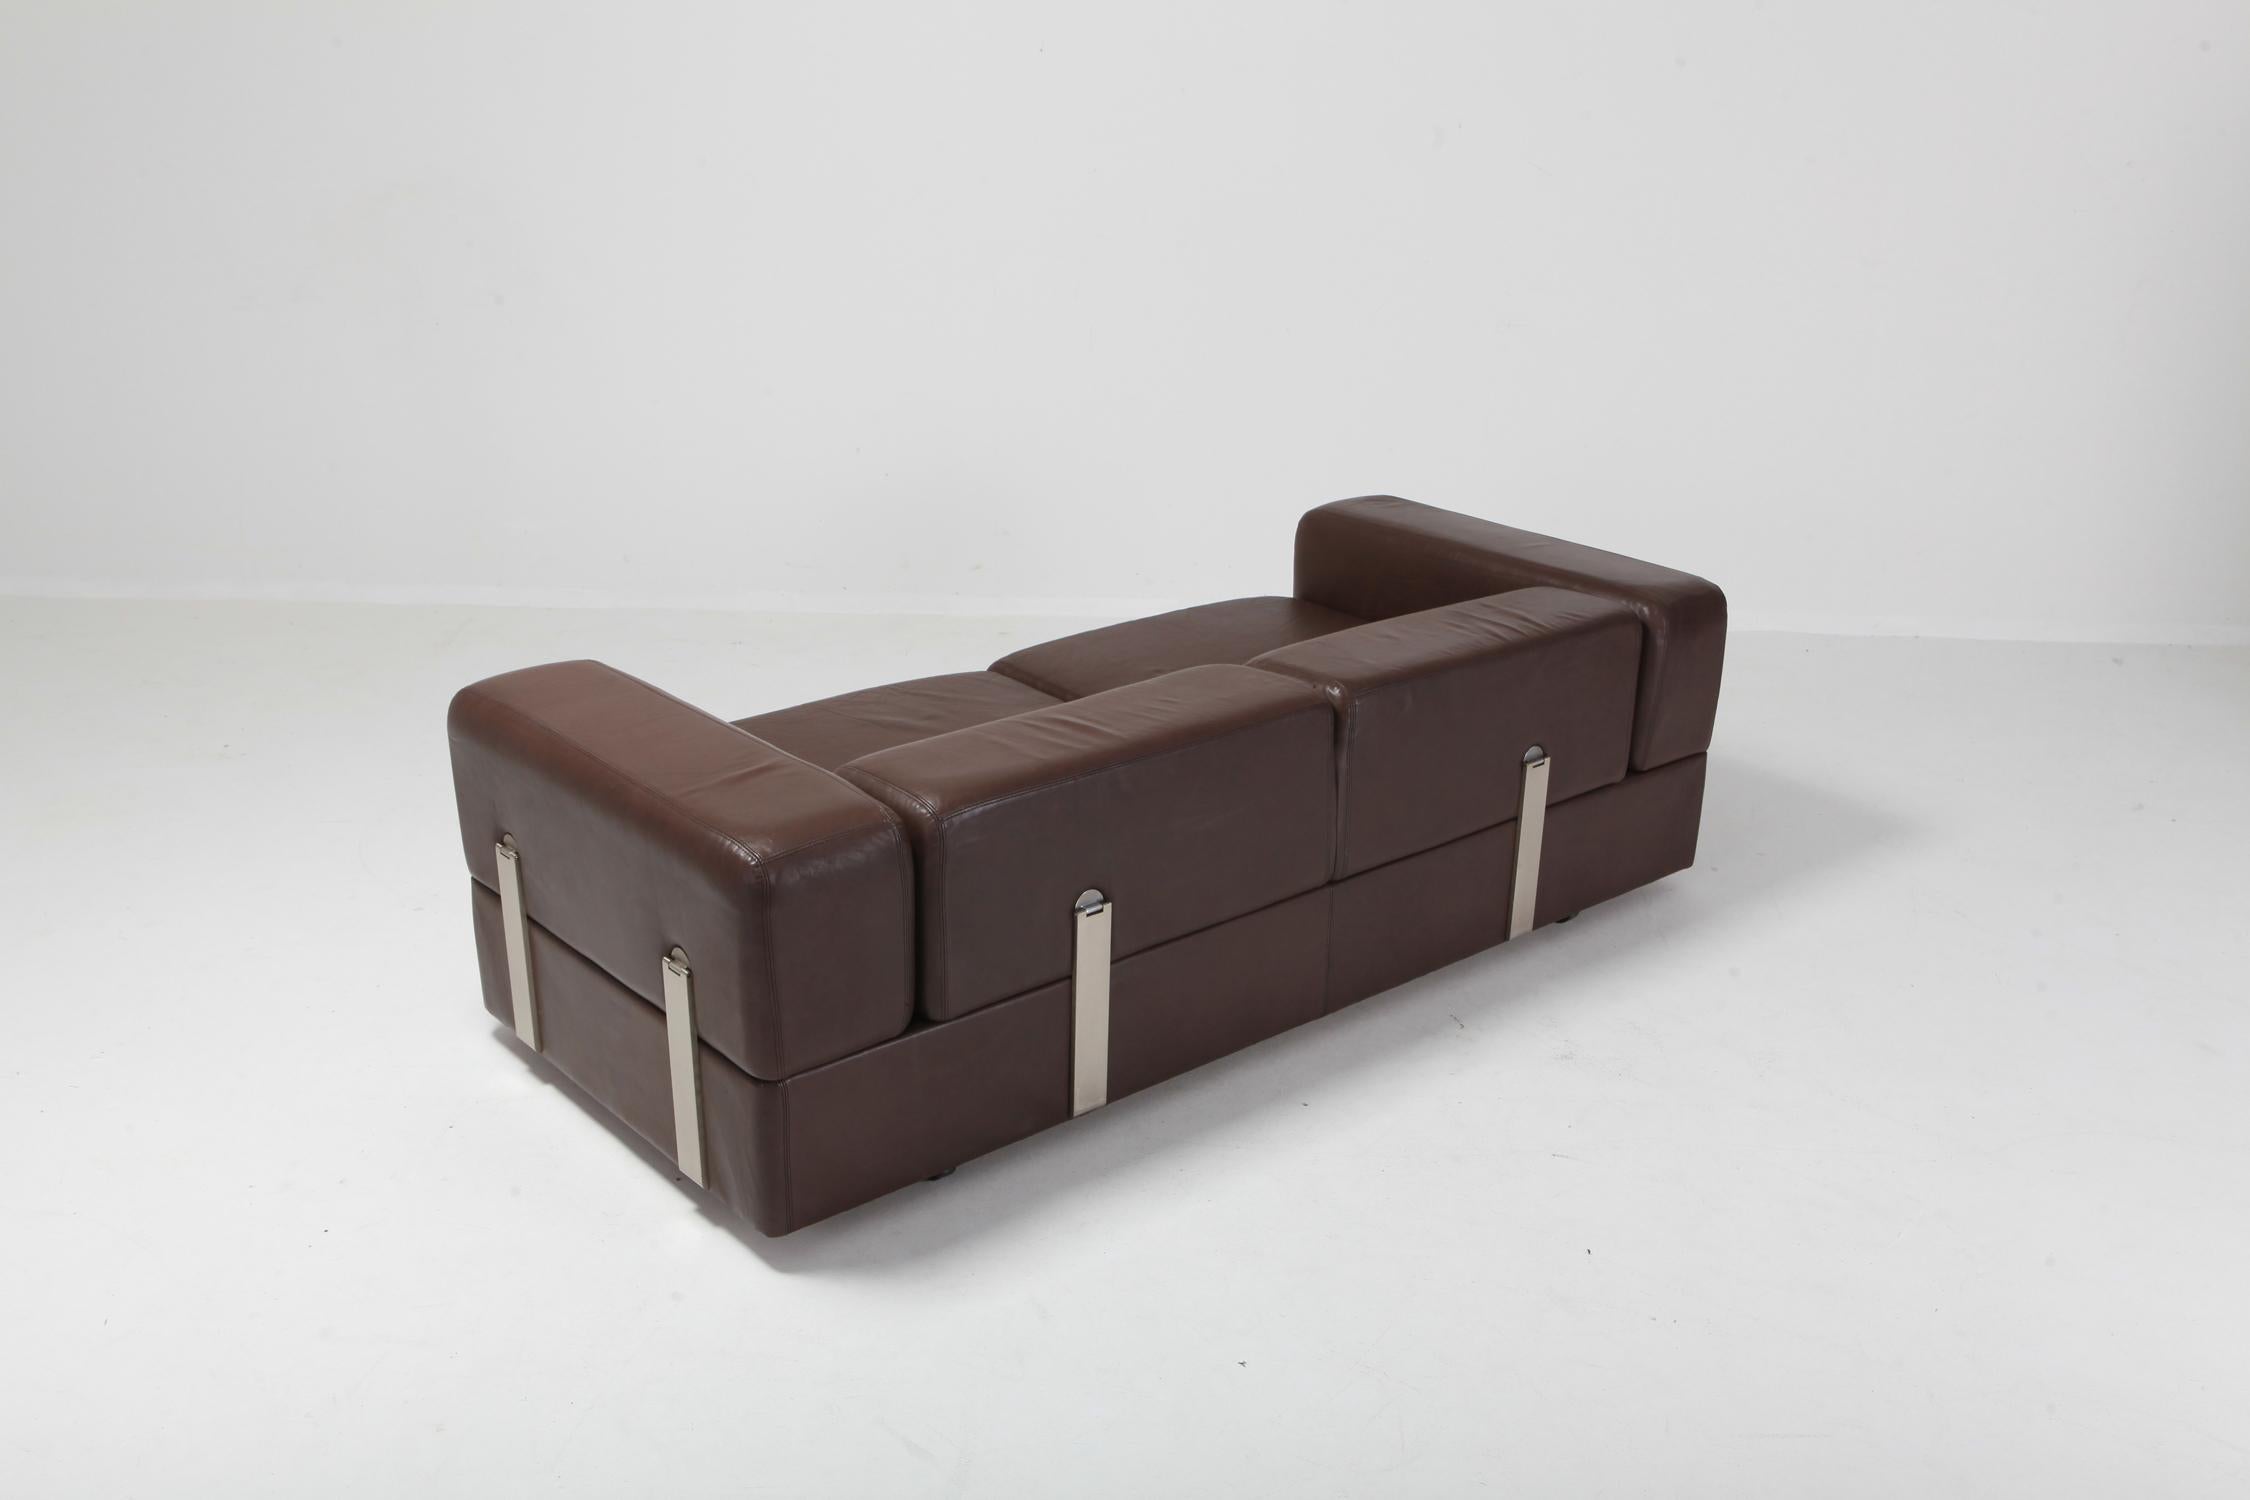 sofa daybed